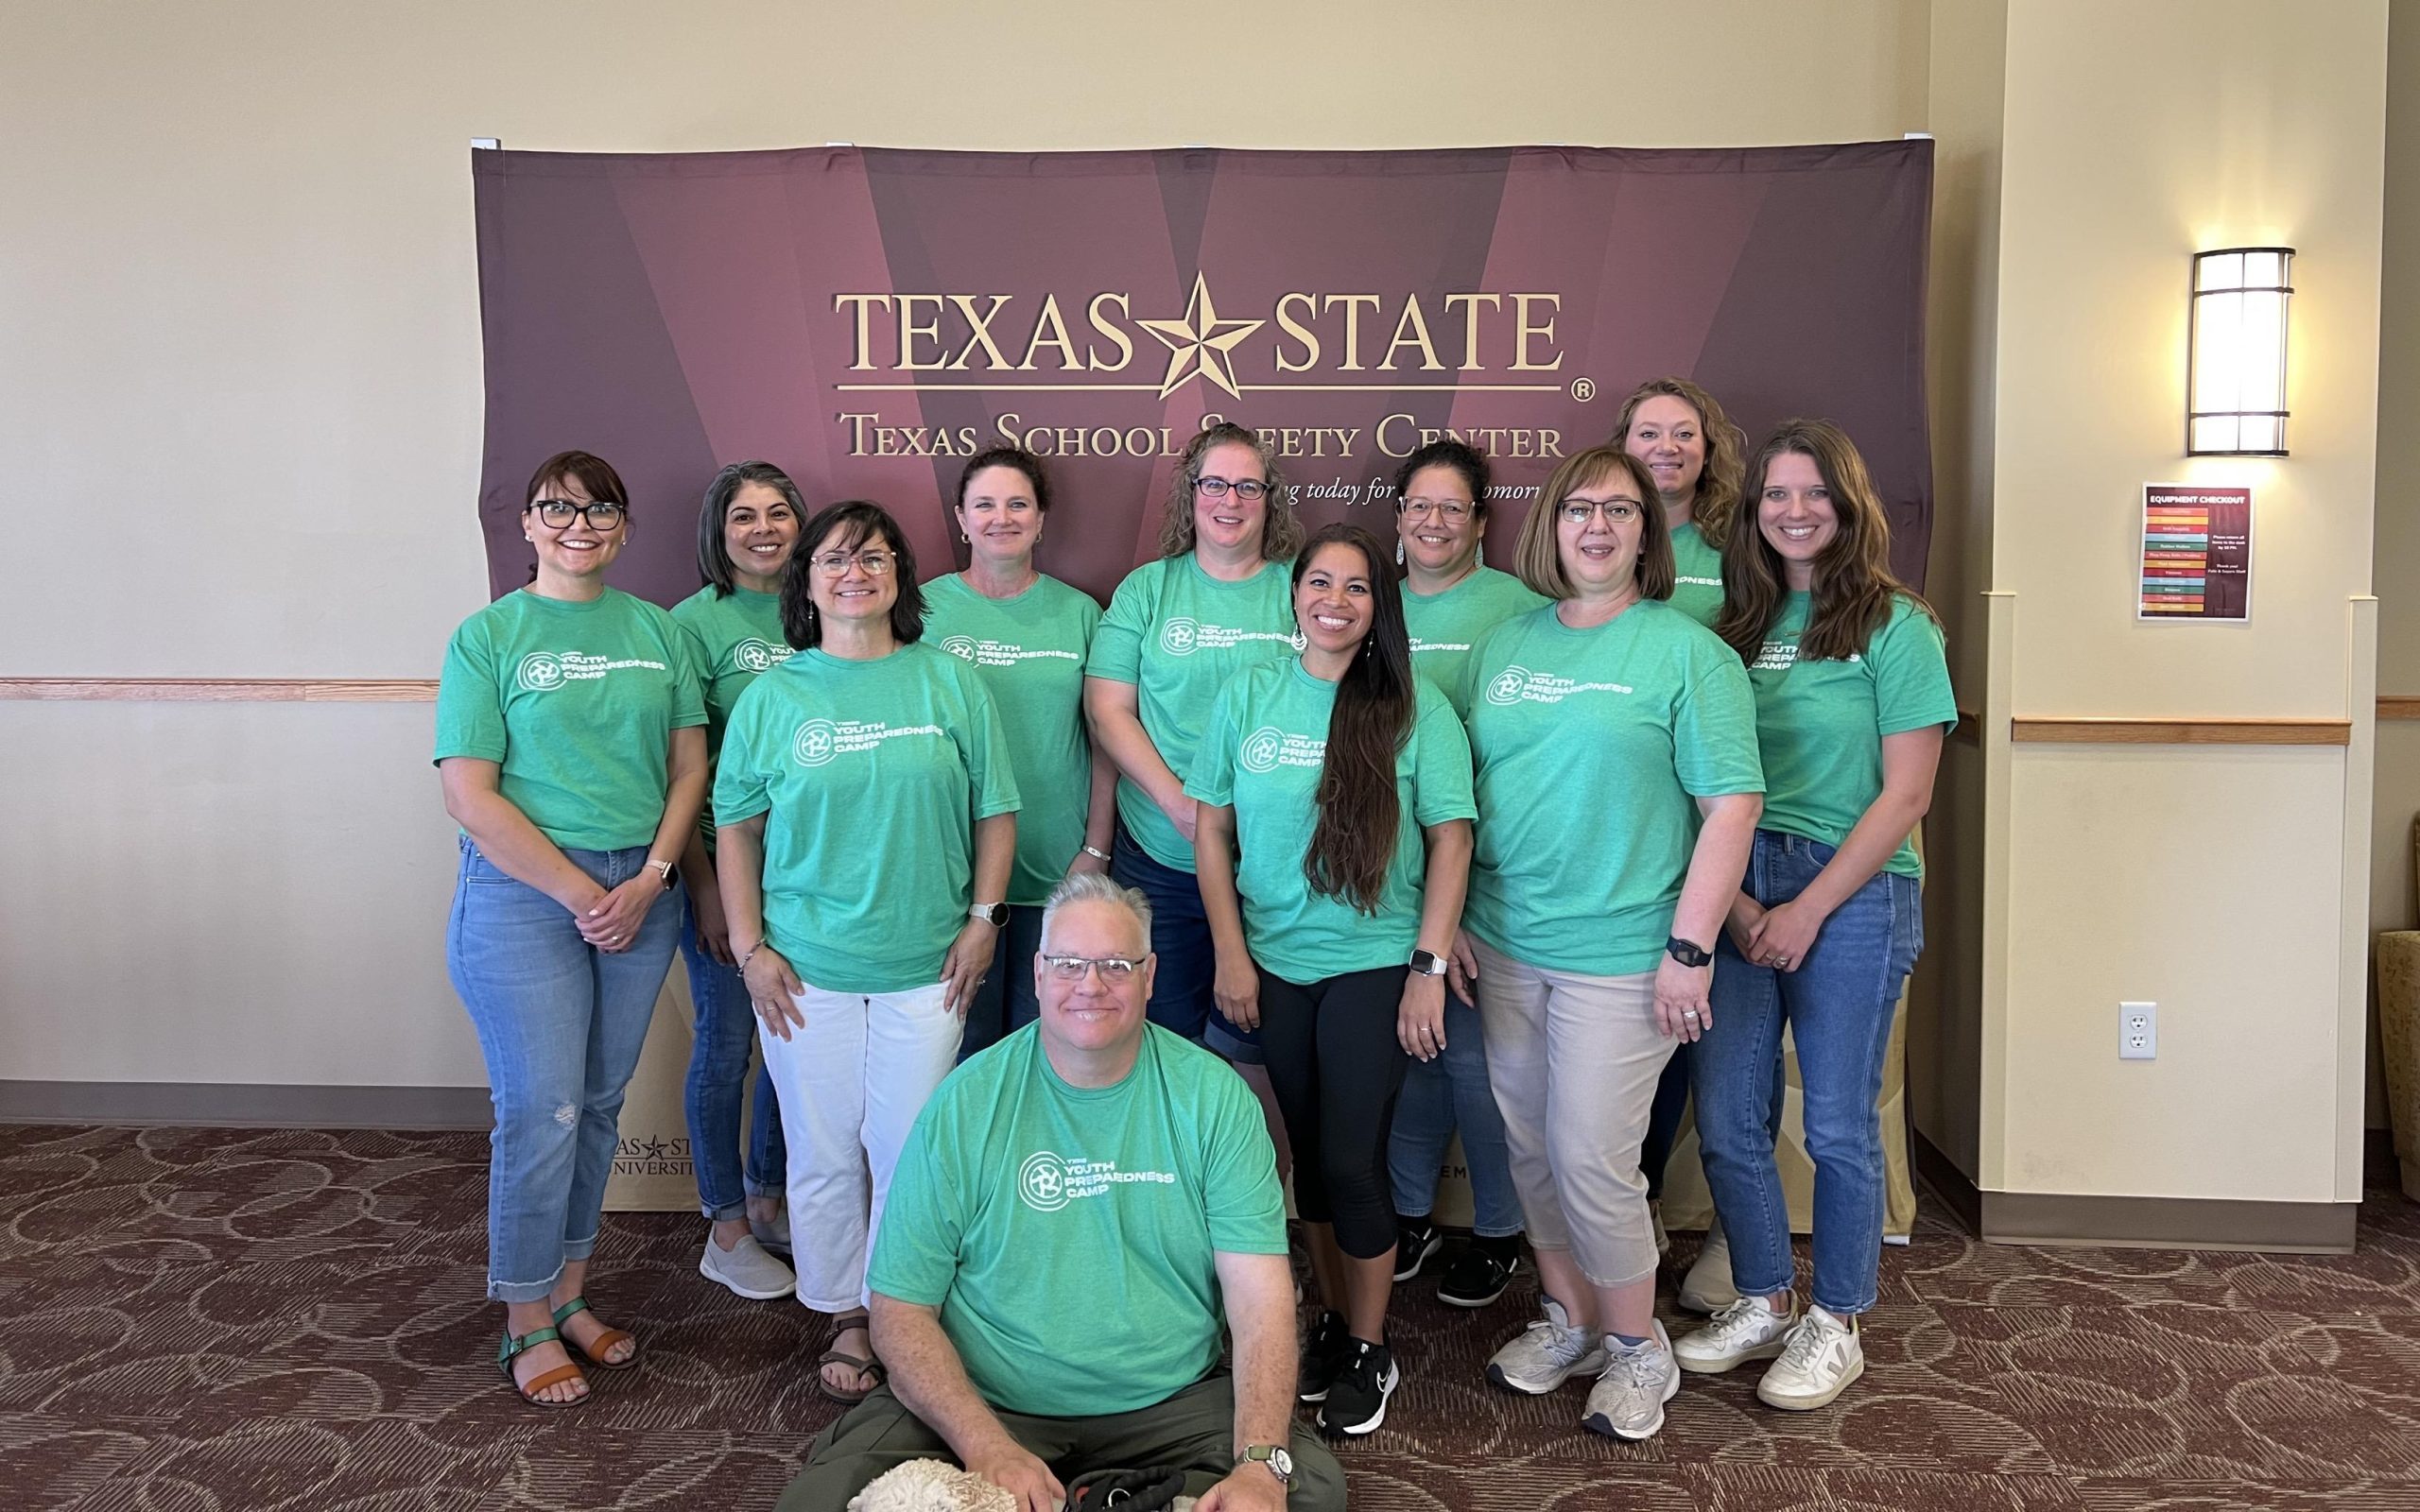 A group photo of the Texas School Safety Center Staff at an event